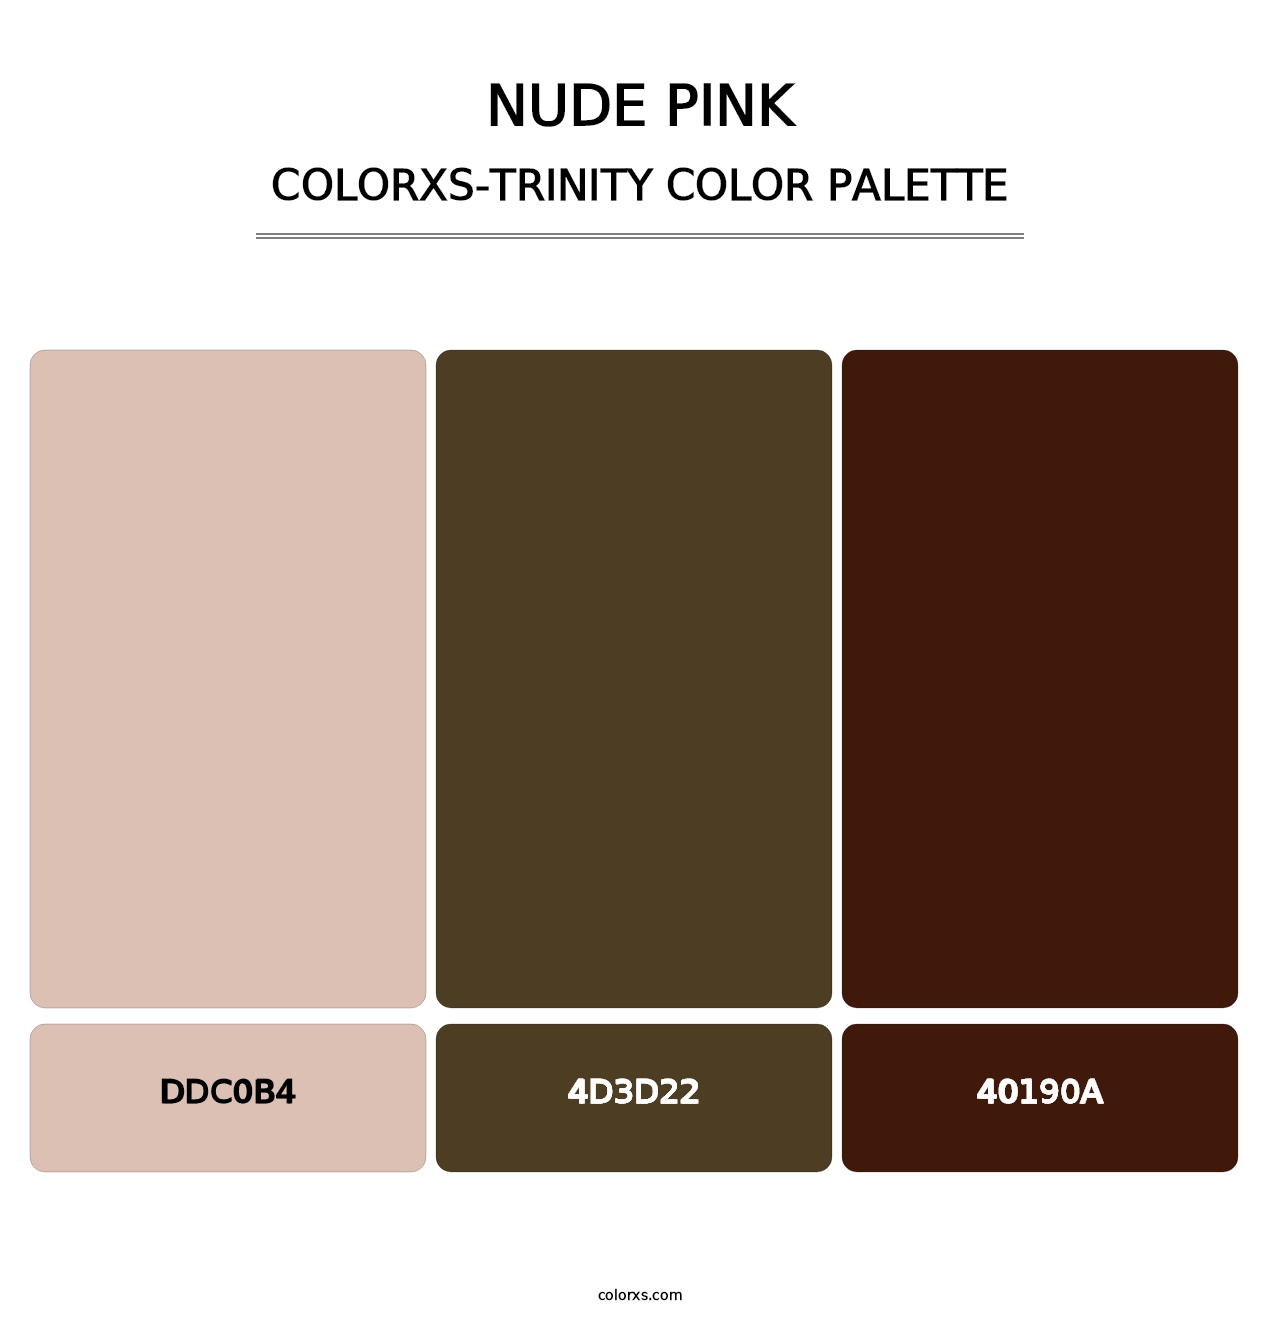 Nude Pink - Colorxs Trinity Palette